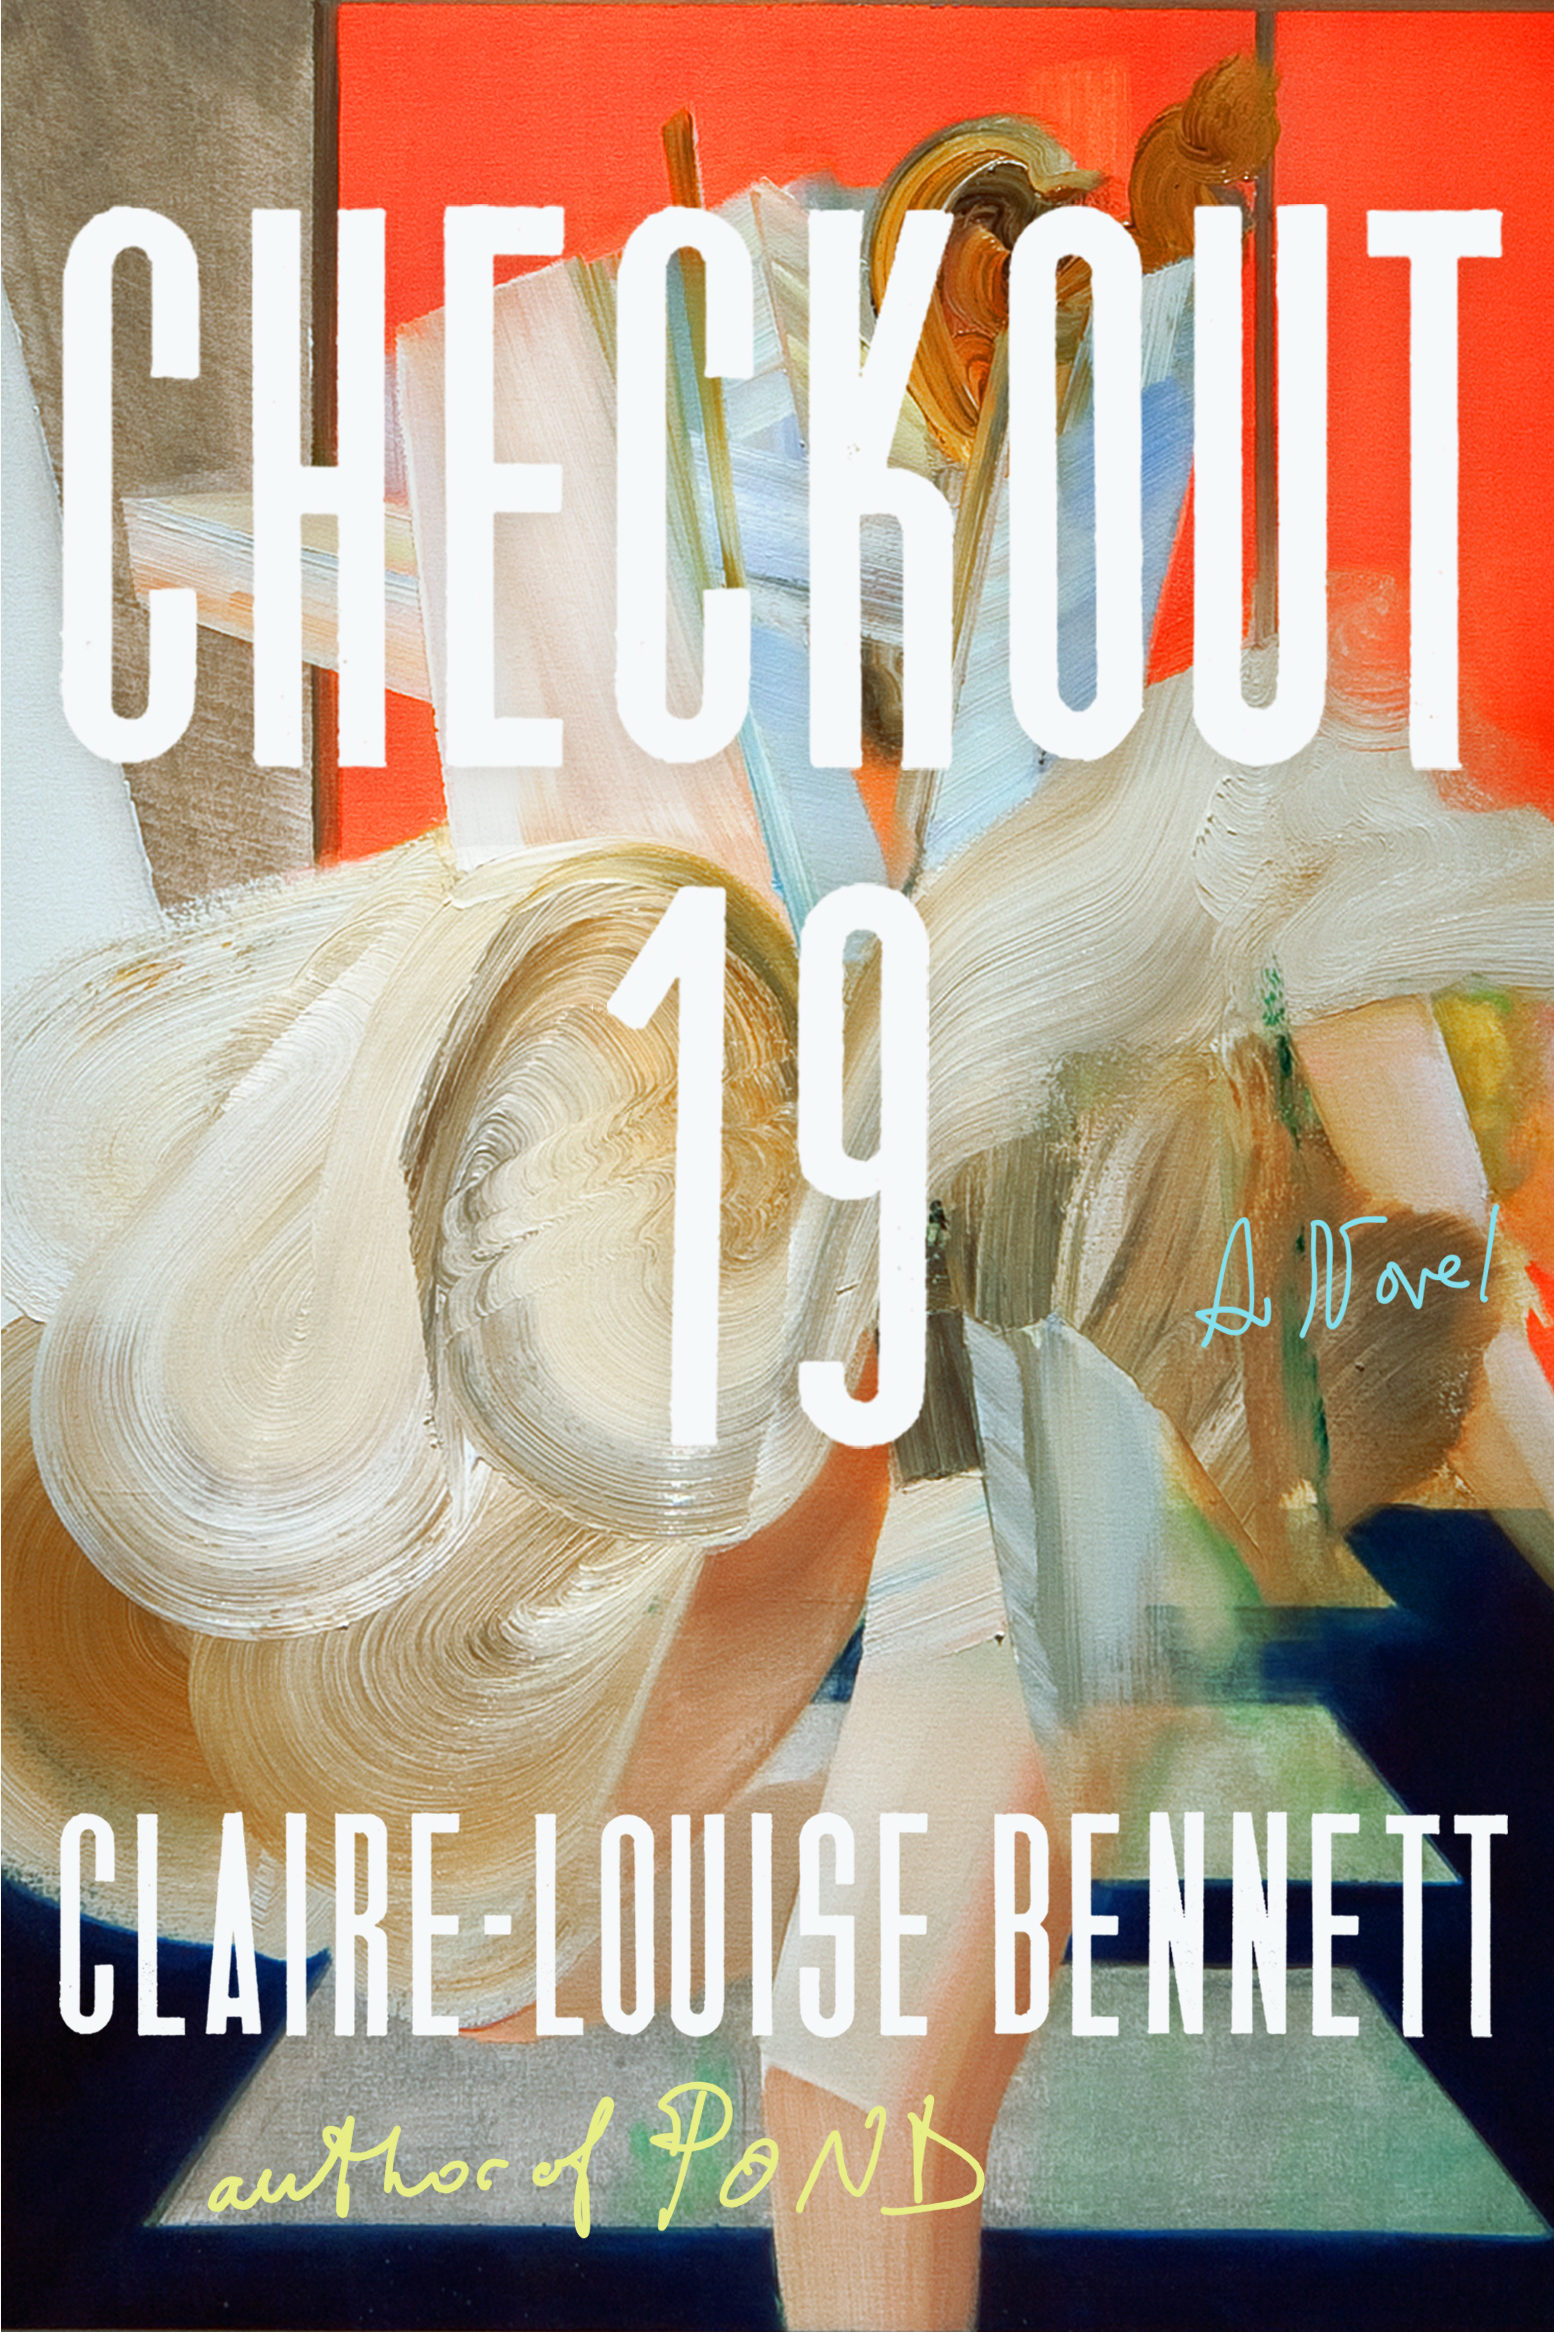 Book review: Checkout 19, by Claire-Louise Bennett